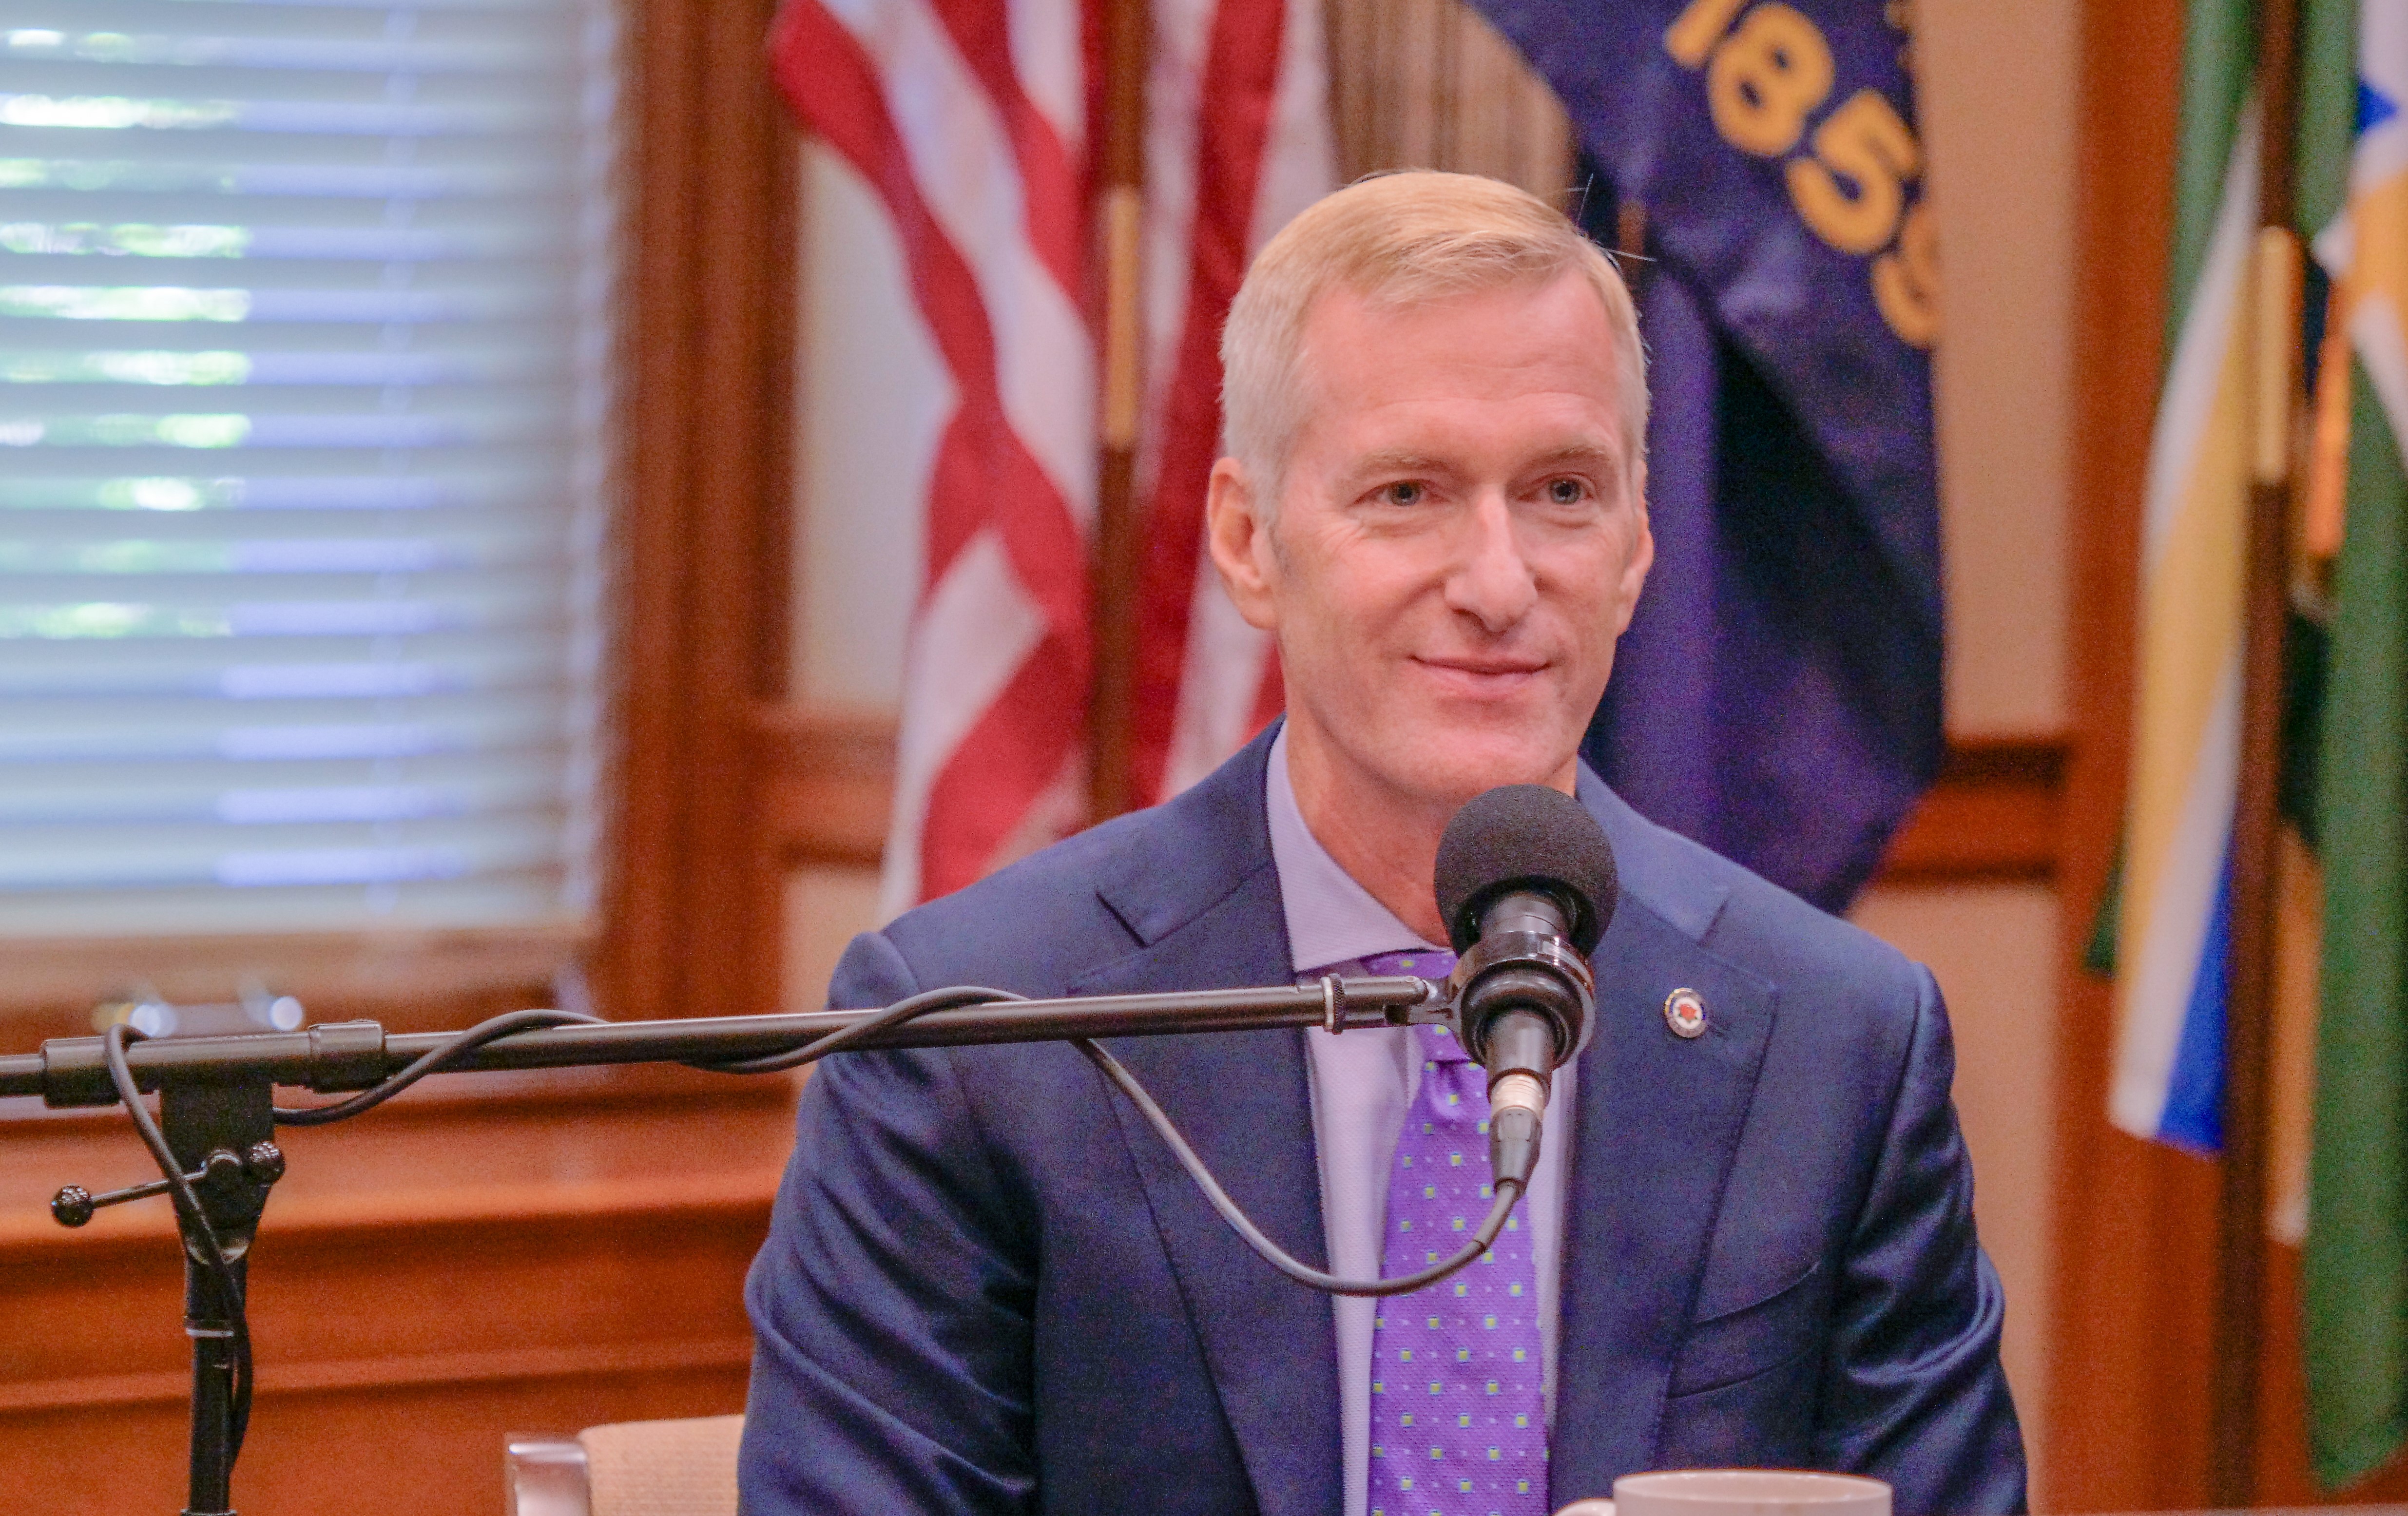 Mayor Ted Wheeler on the challenges and opportunities facing